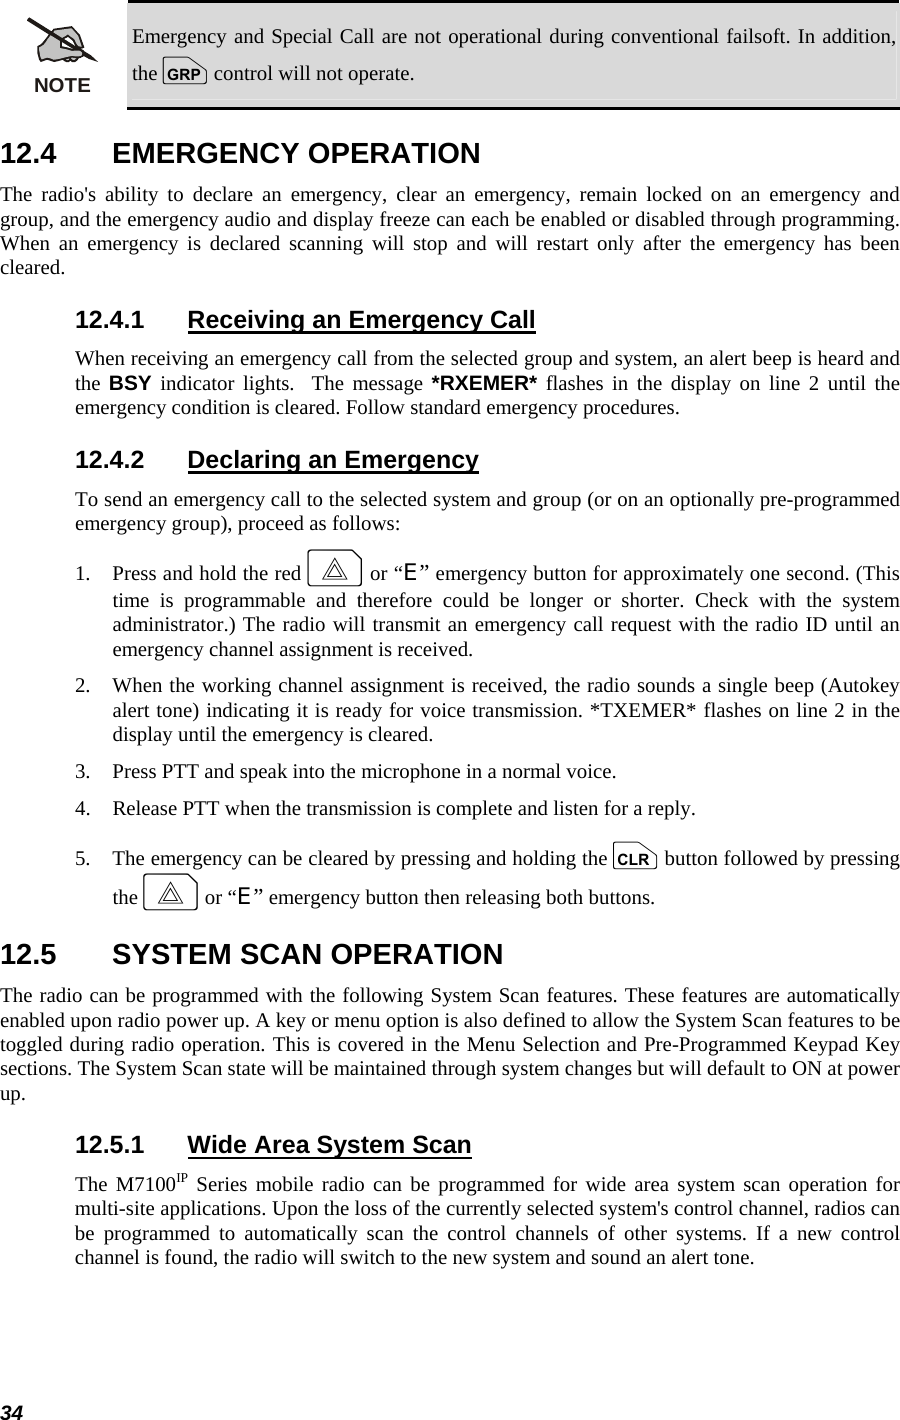  34 NOTE Emergency and Special Call are not operational during conventional failsoft. In addition, the g control will not operate. 12.4 EMERGENCY OPERATION The radio&apos;s ability to declare an emergency, clear an emergency, remain locked on an emergency and group, and the emergency audio and display freeze can each be enabled or disabled through programming. When an emergency is declared scanning will stop and will restart only after the emergency has been cleared. 12.4.1  Receiving an Emergency Call When receiving an emergency call from the selected group and system, an alert beep is heard and the  BSY indicator lights.  The message *RXEMER* flashes in the display on line 2 until the emergency condition is cleared. Follow standard emergency procedures. 12.4.2  Declaring an Emergency To send an emergency call to the selected system and group (or on an optionally pre-programmed emergency group), proceed as follows: 1.   Press and hold the red E or “E” emergency button for approximately one second. (This time is programmable and therefore could be longer or shorter. Check with the system administrator.) The radio will transmit an emergency call request with the radio ID until an emergency channel assignment is received. 2.   When the working channel assignment is received, the radio sounds a single beep (Autokey alert tone) indicating it is ready for voice transmission. *TXEMER* flashes on line 2 in the display until the emergency is cleared. 3.   Press PTT and speak into the microphone in a normal voice. 4.   Release PTT when the transmission is complete and listen for a reply. 5.   The emergency can be cleared by pressing and holding the c button followed by pressing the E or “E” emergency button then releasing both buttons. 12.5  SYSTEM SCAN OPERATION The radio can be programmed with the following System Scan features. These features are automatically enabled upon radio power up. A key or menu option is also defined to allow the System Scan features to be toggled during radio operation. This is covered in the Menu Selection and Pre-Programmed Keypad Key sections. The System Scan state will be maintained through system changes but will default to ON at power up. 12.5.1  Wide Area System Scan The M7100IP Series mobile radio can be programmed for wide area system scan operation for multi-site applications. Upon the loss of the currently selected system&apos;s control channel, radios can be programmed to automatically scan the control channels of other systems. If a new control channel is found, the radio will switch to the new system and sound an alert tone. 